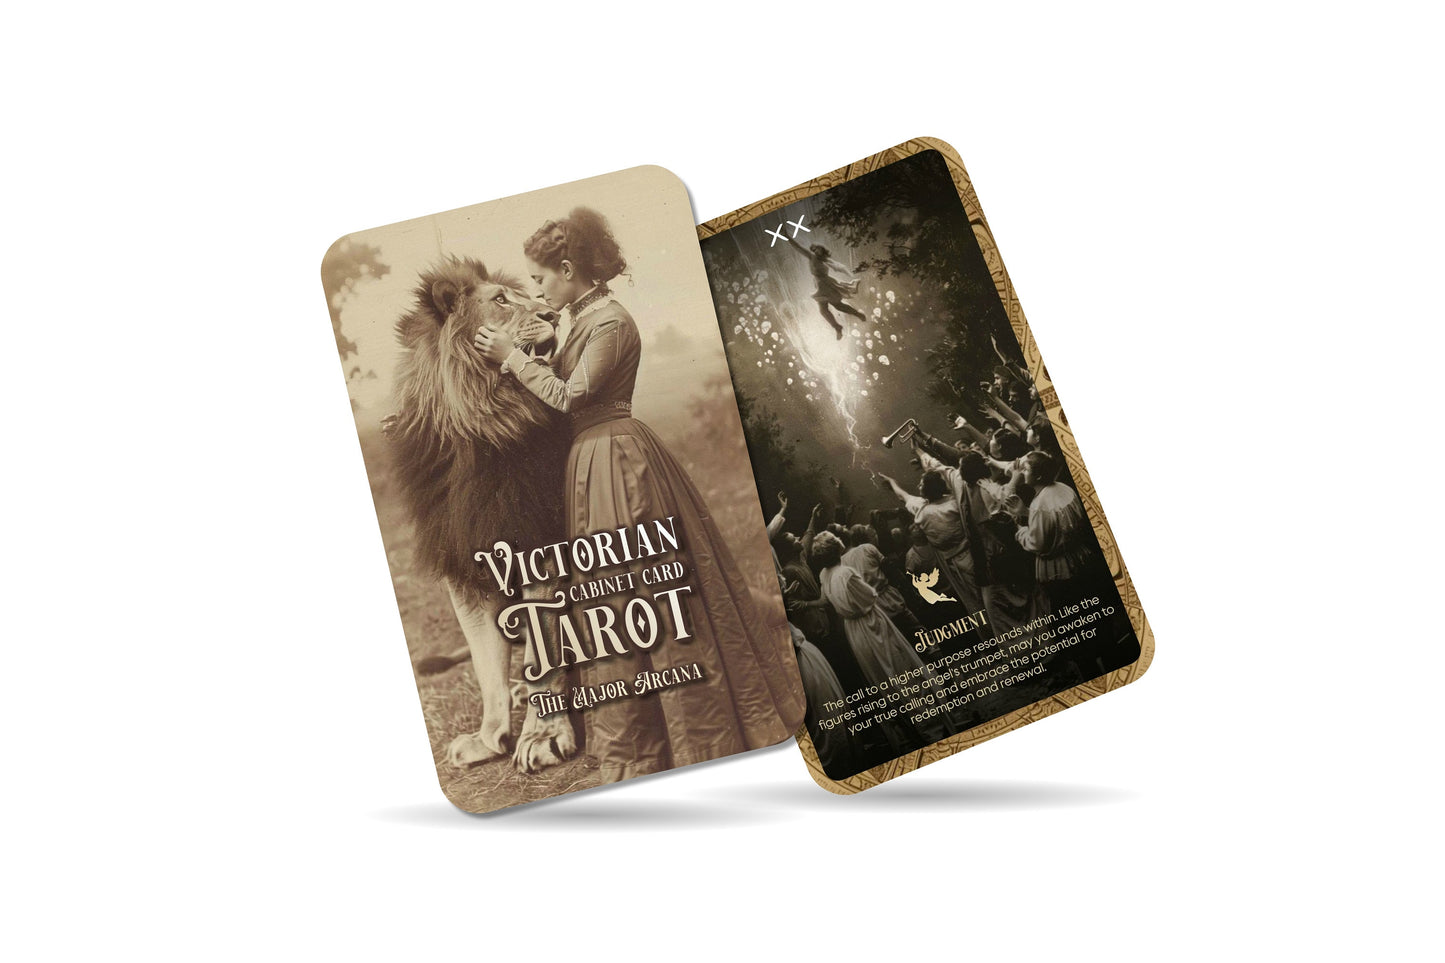 Victorian Cabinet Card Tarot - Major Arcana - insights that are as relevant today as they would have been in the Victorian era